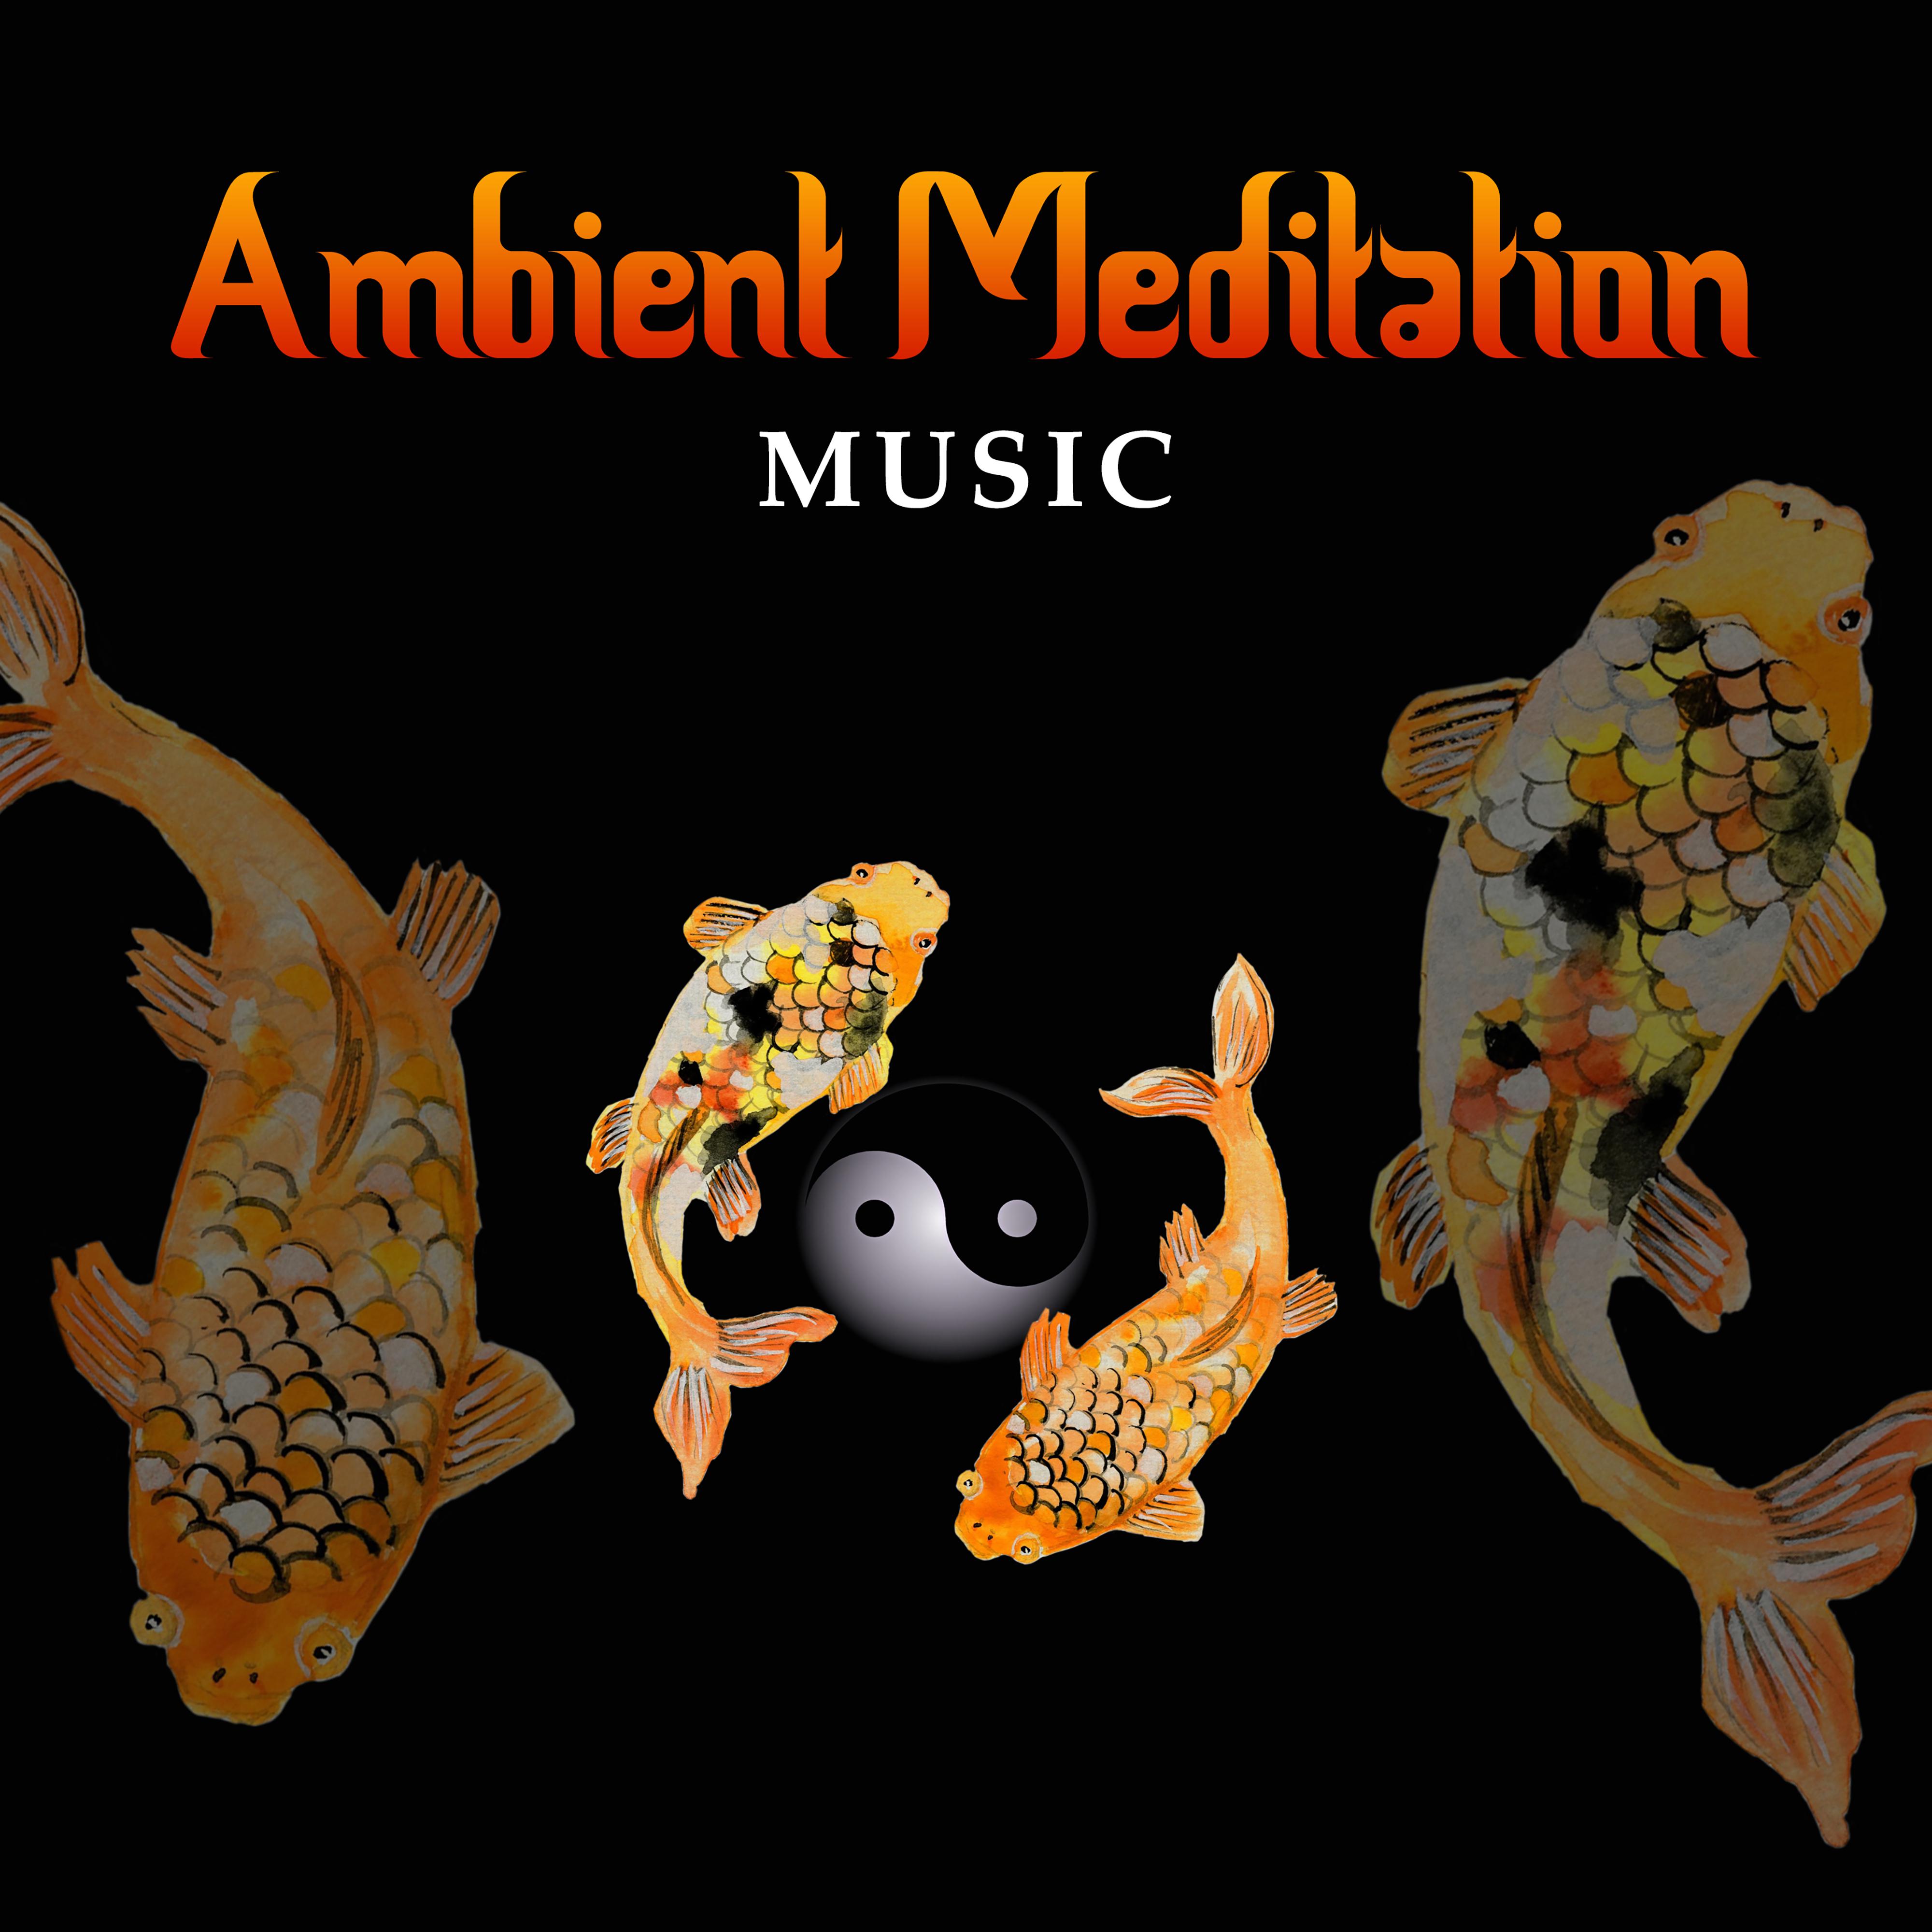 Ambient Meditation Music – Nature Sounds, Helpful for Deep Meditation, Yoga, Relax Your Body & Mind